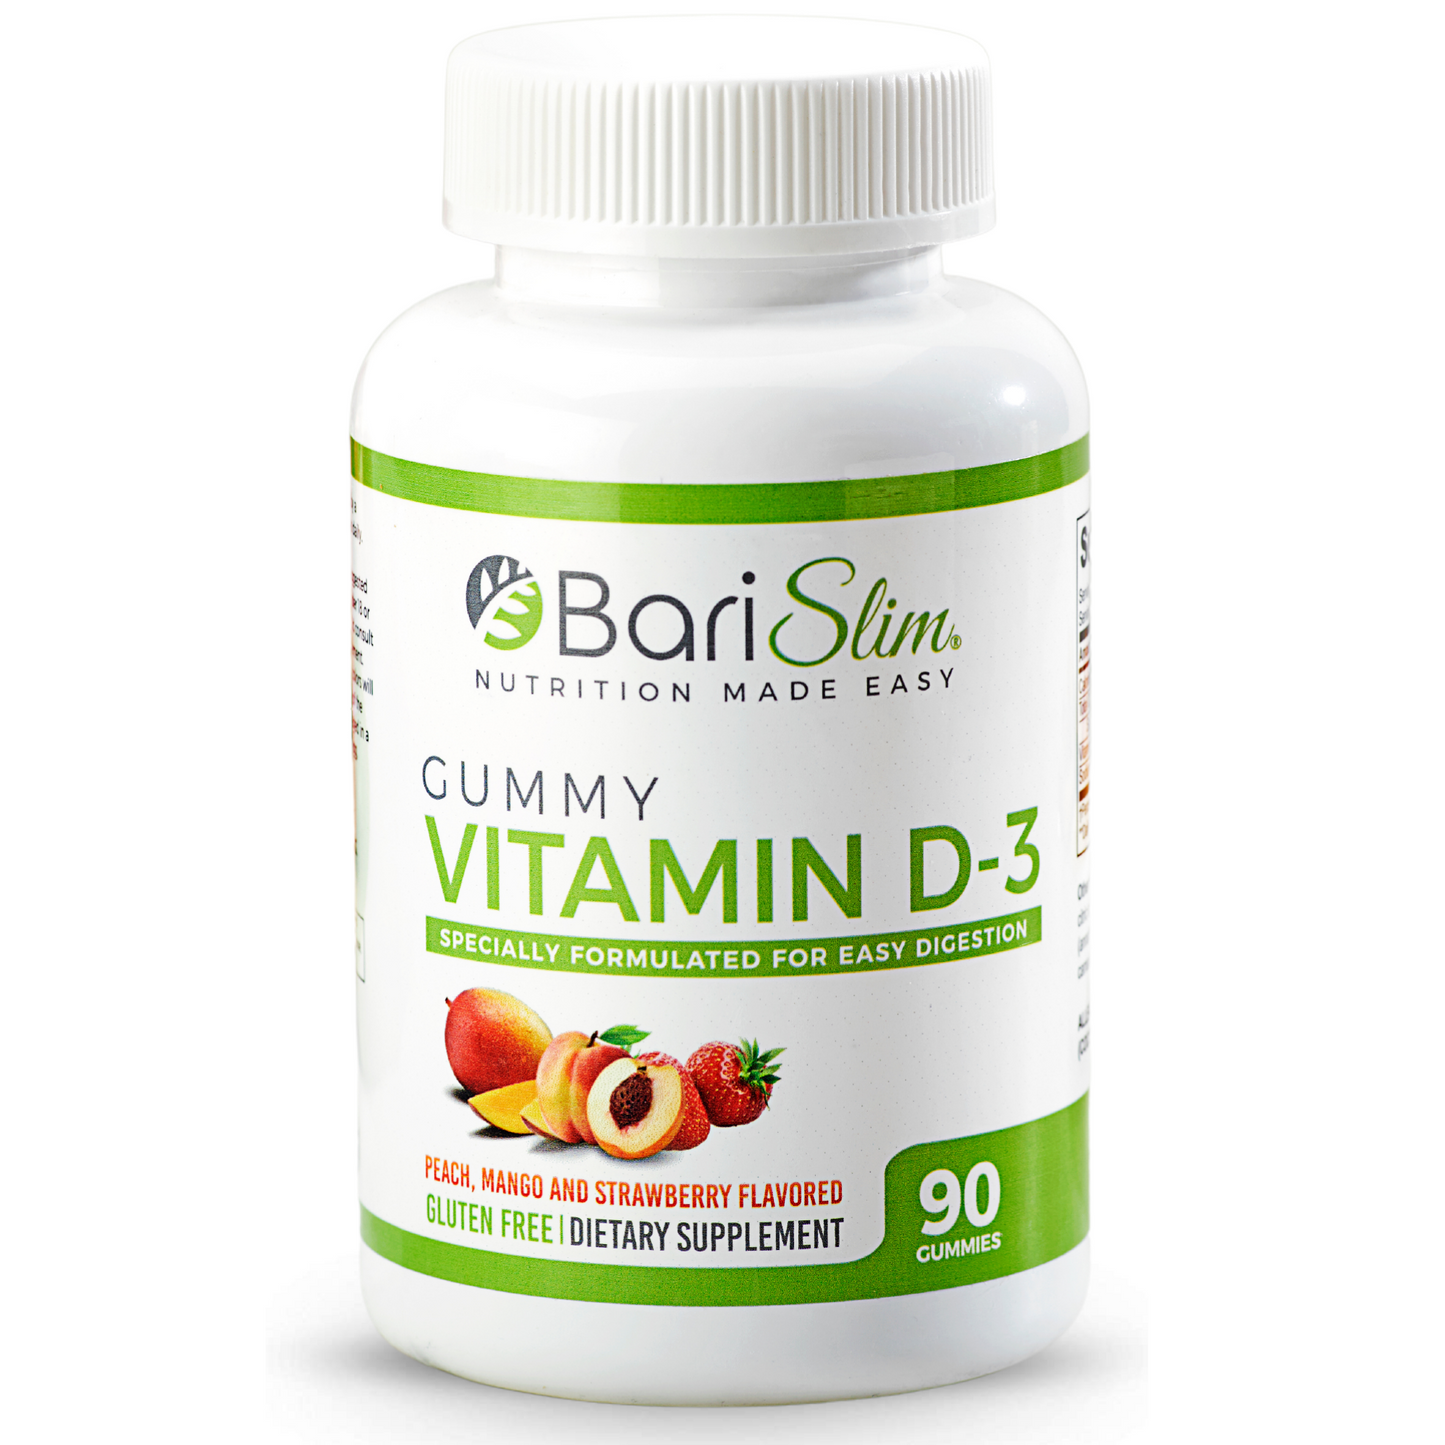 Bariatric Vitamin D-3 Gummy for bariatric patients